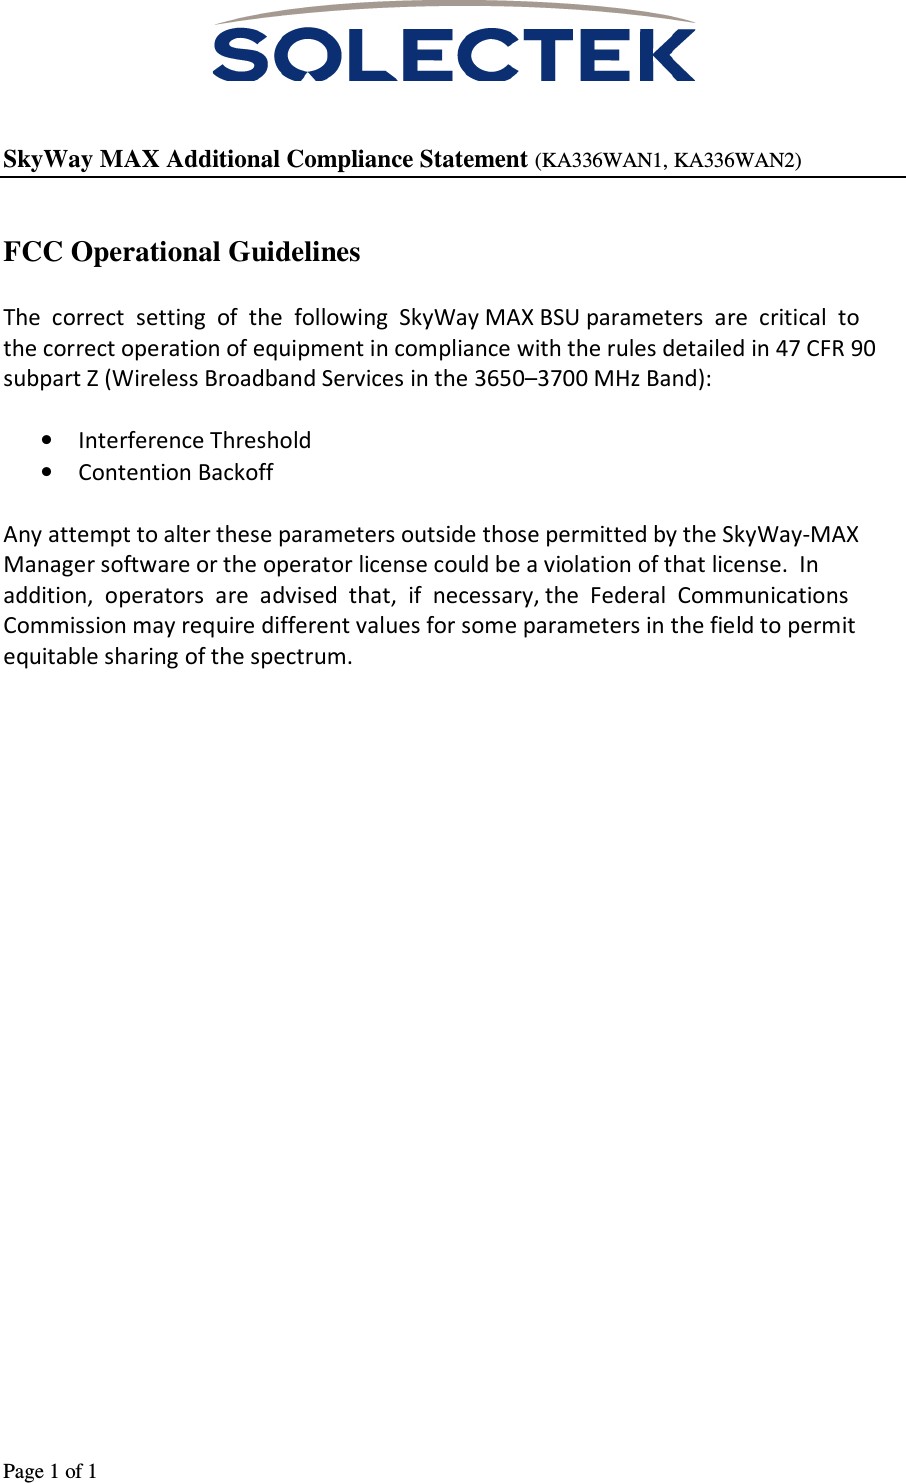                                                                                                                                      Page 1 of 1      SkyWay MAX Additional Compliance Statement (KA336WAN1, KA336WAN2)   FCC Operational Guidelines  The  correct  setting  of  the  following  SkyWay MAX BSU parameters  are  critical  to  the correct operation of equipment in compliance with the rules detailed in 47 CFR 90 subpart Z (Wireless Broadband Services in the 3650–3700 MHz Band):  • Interference Threshold  • Contention Backoff  Any attempt to alter these parameters outside those permitted by the SkyWay-MAX Manager software or the operator license could be a violation of that license.  In  addition,  operators  are  advised  that,  if  necessary, the  Federal  Communications Commission may require different values for some parameters in the field to permit equitable sharing of the spectrum. 